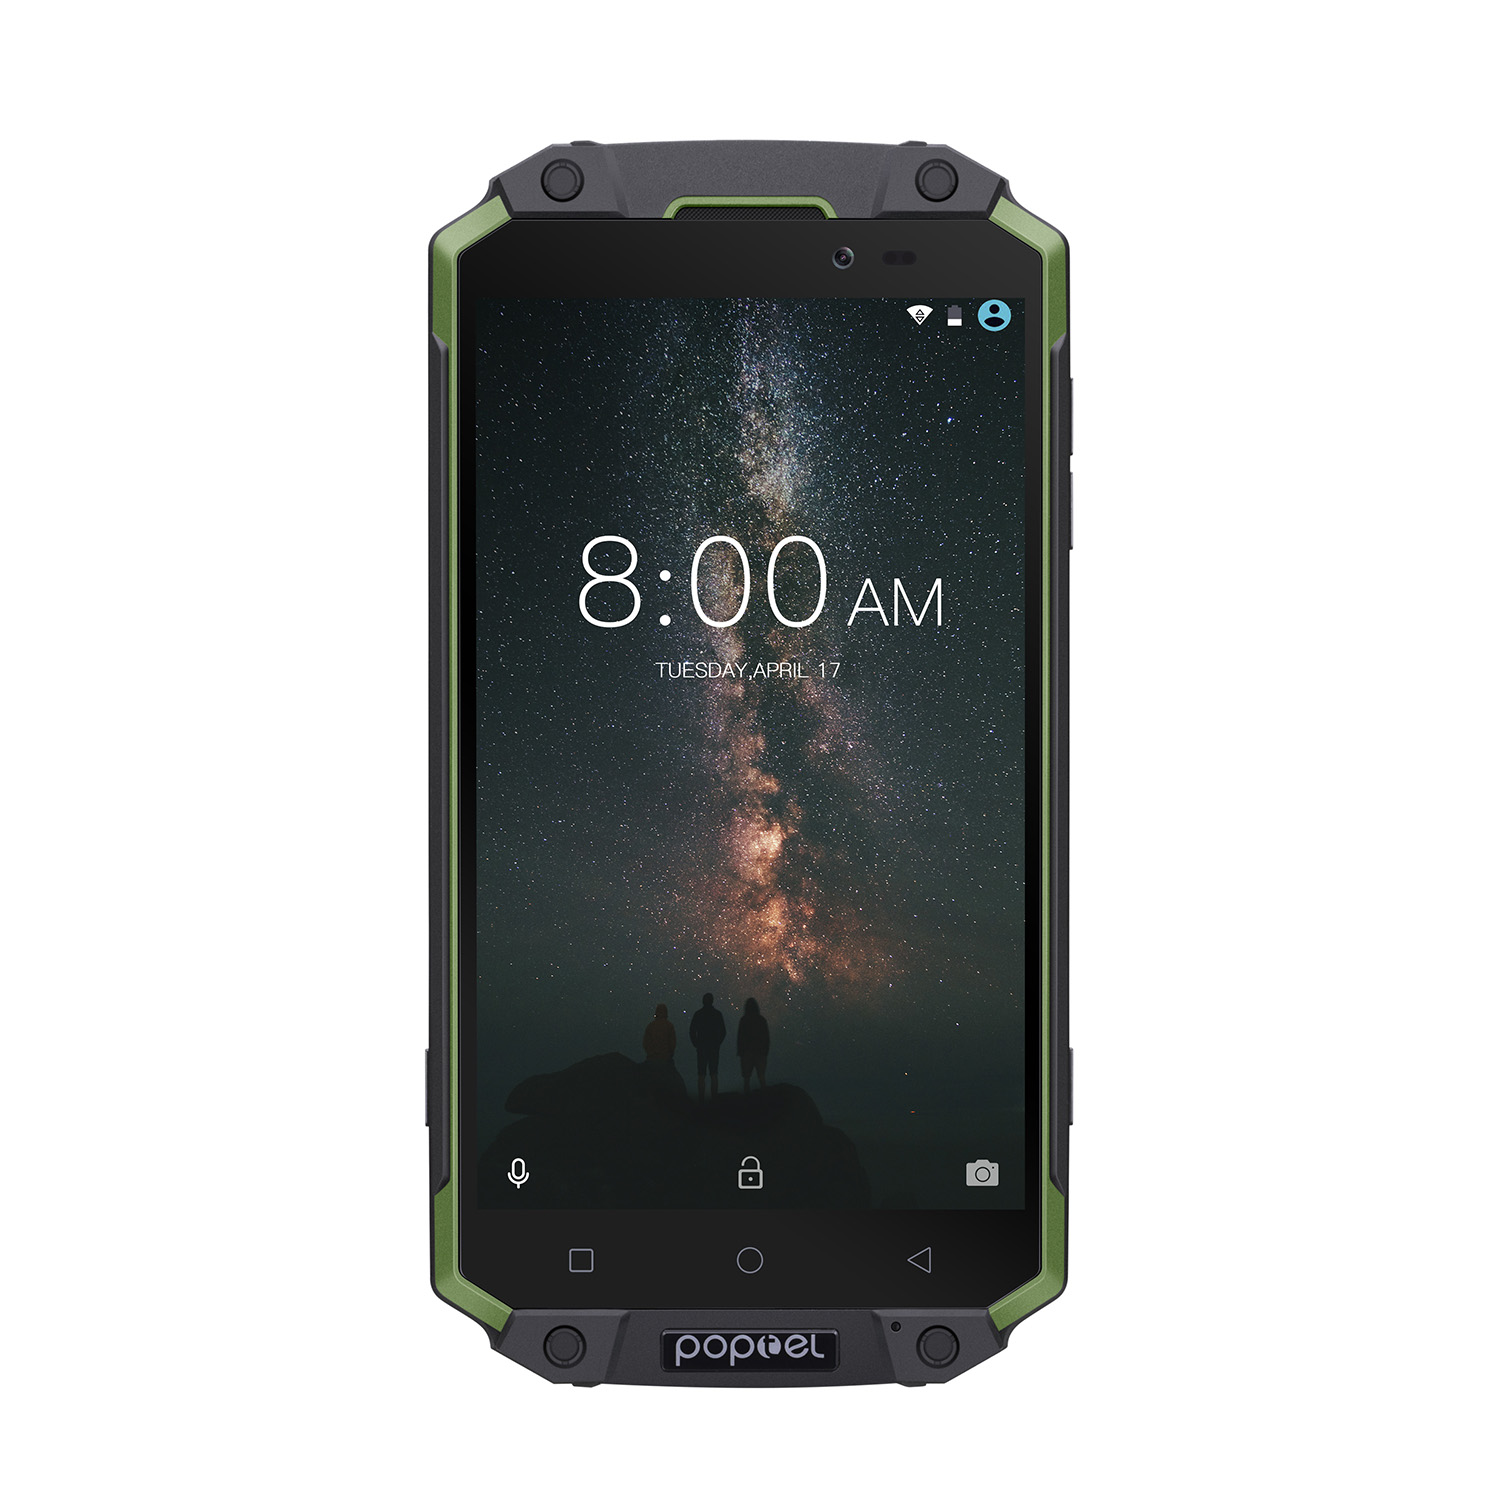 POPTEL P9000 MAX Android Phone Green- Android 7.0-4GB RAM, 5.5-Inch FHD, IP68, Dual-IMEI